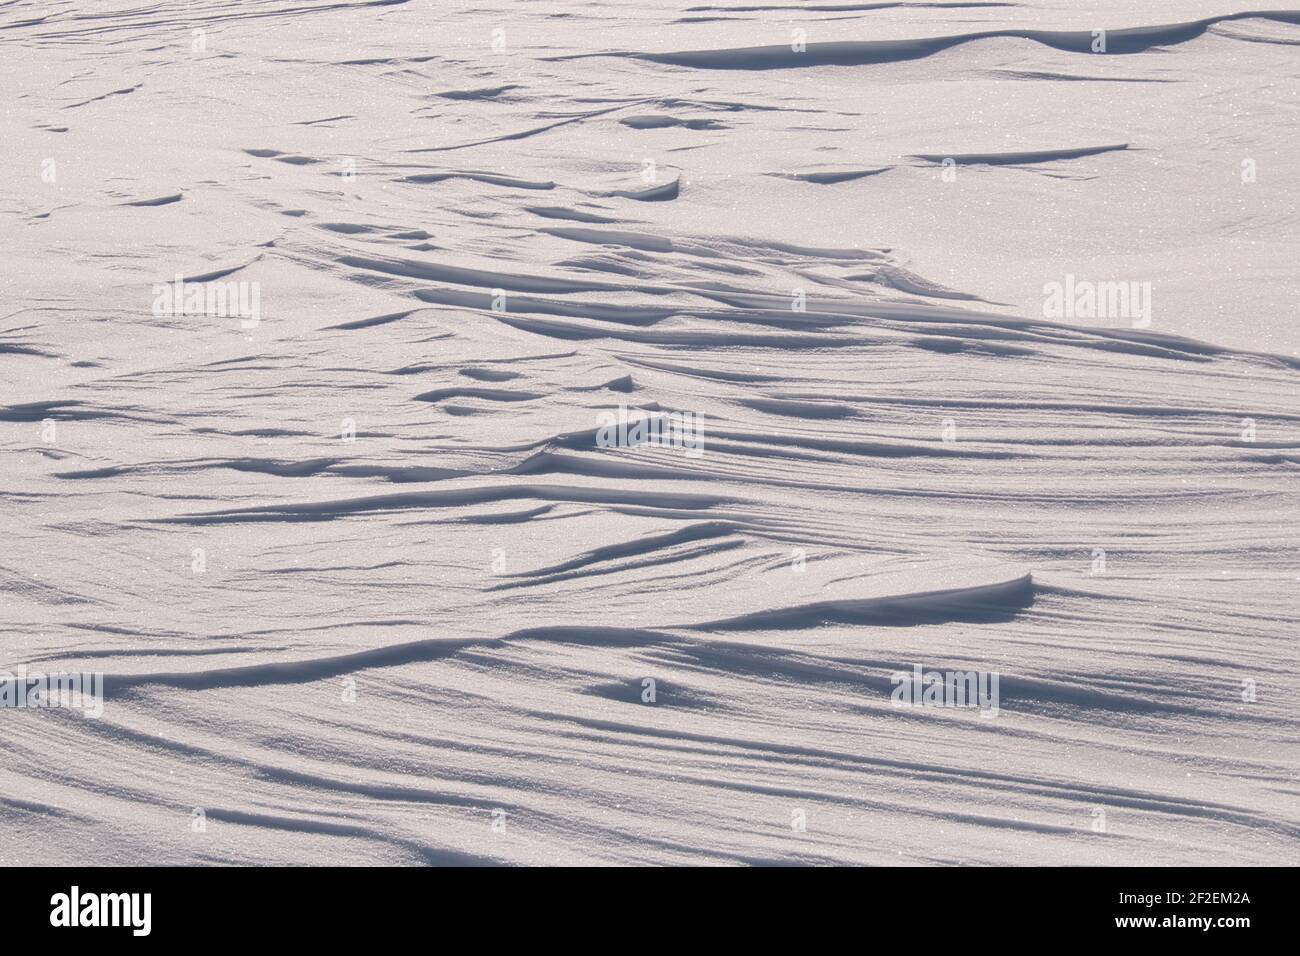 Random patterns in sparkling white snow created by the wind Stock Photo